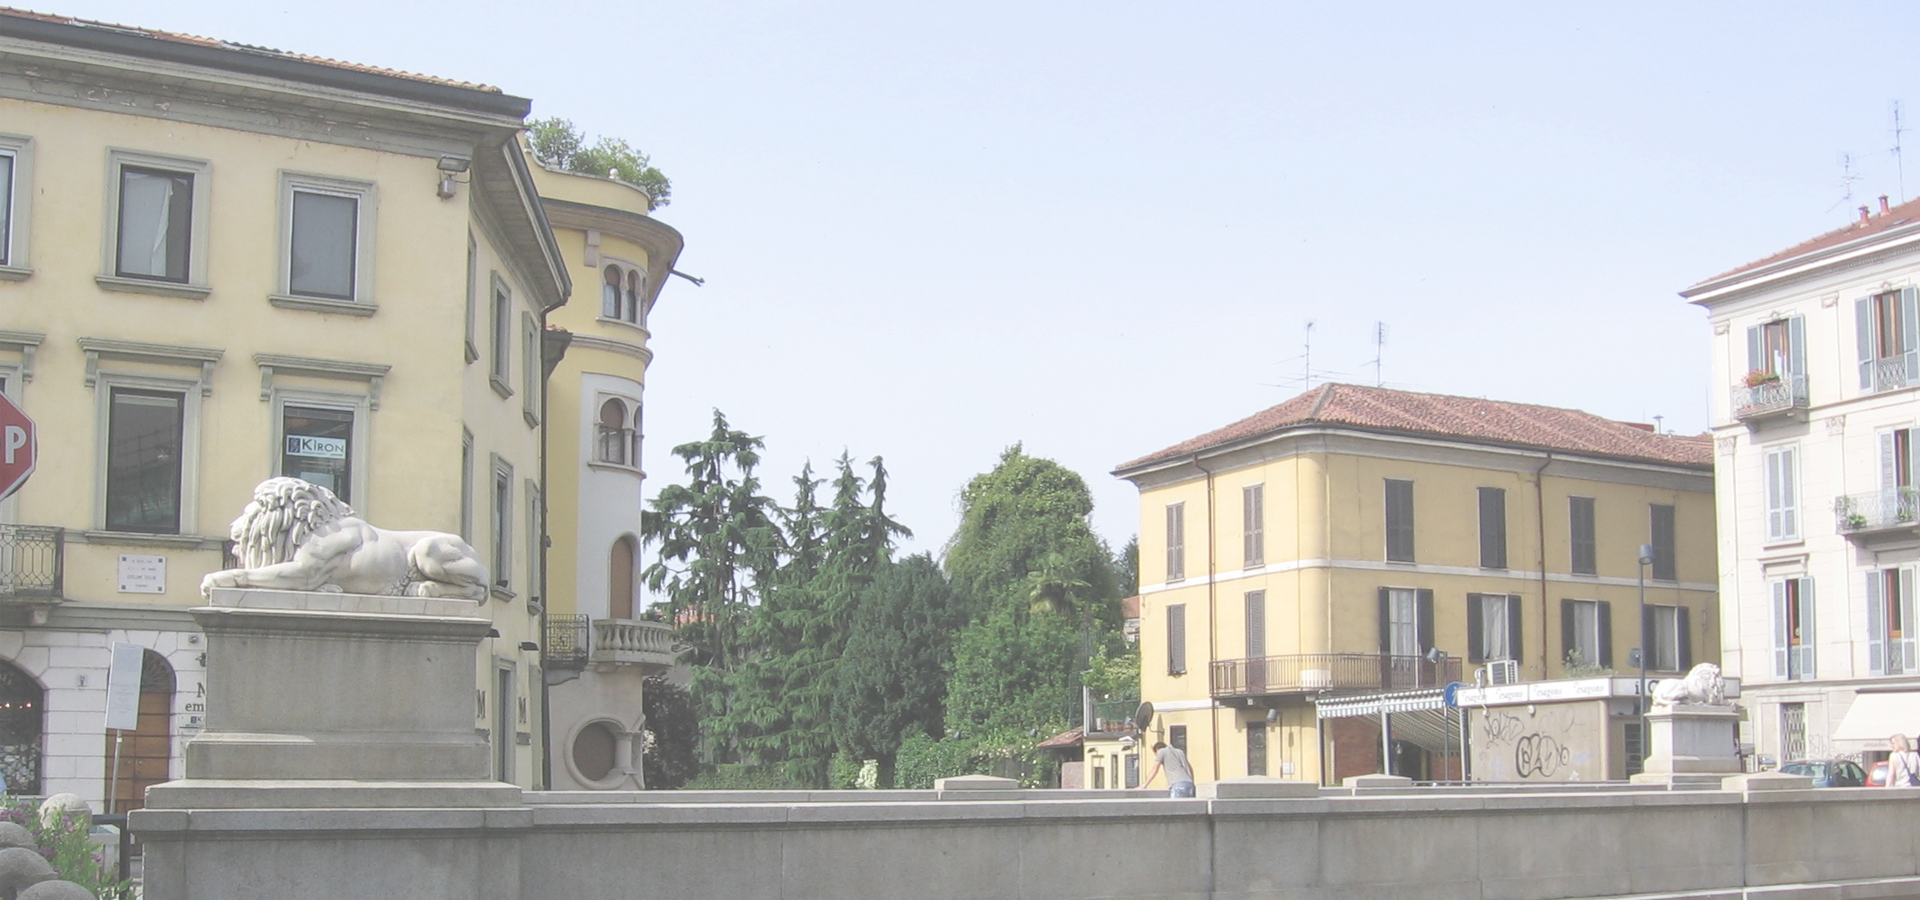 <b>Europe/Rome/Province_of_Monza_and_Brianza</b>